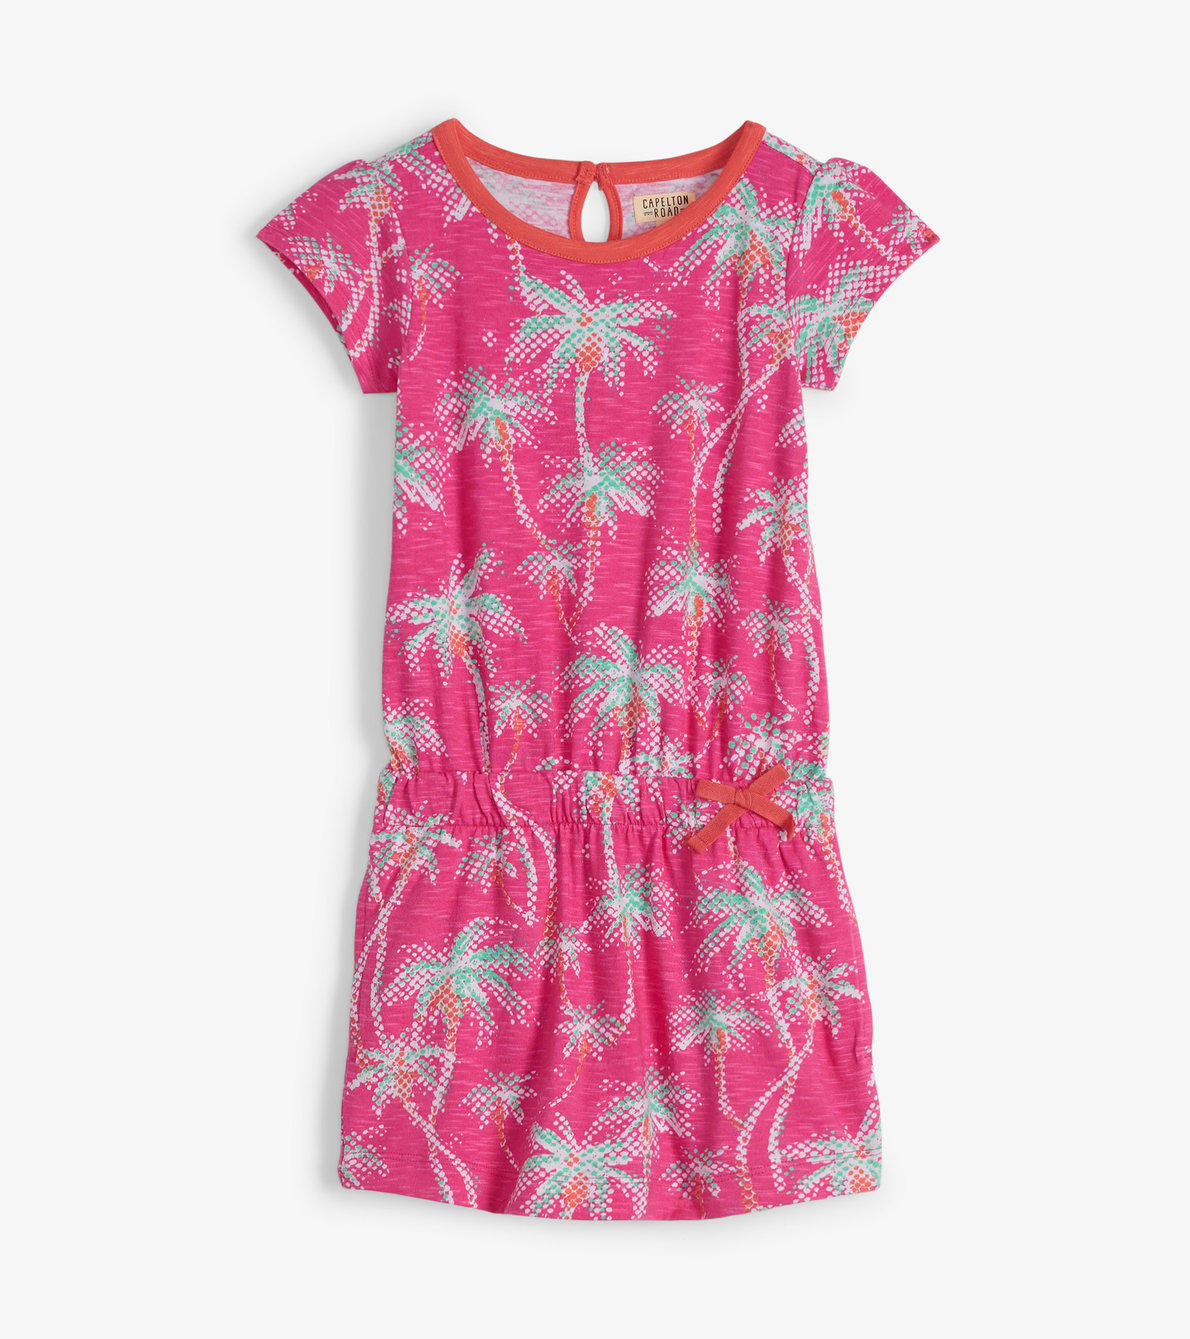 View larger image of Girls Palm Trees T-Shirt Dress